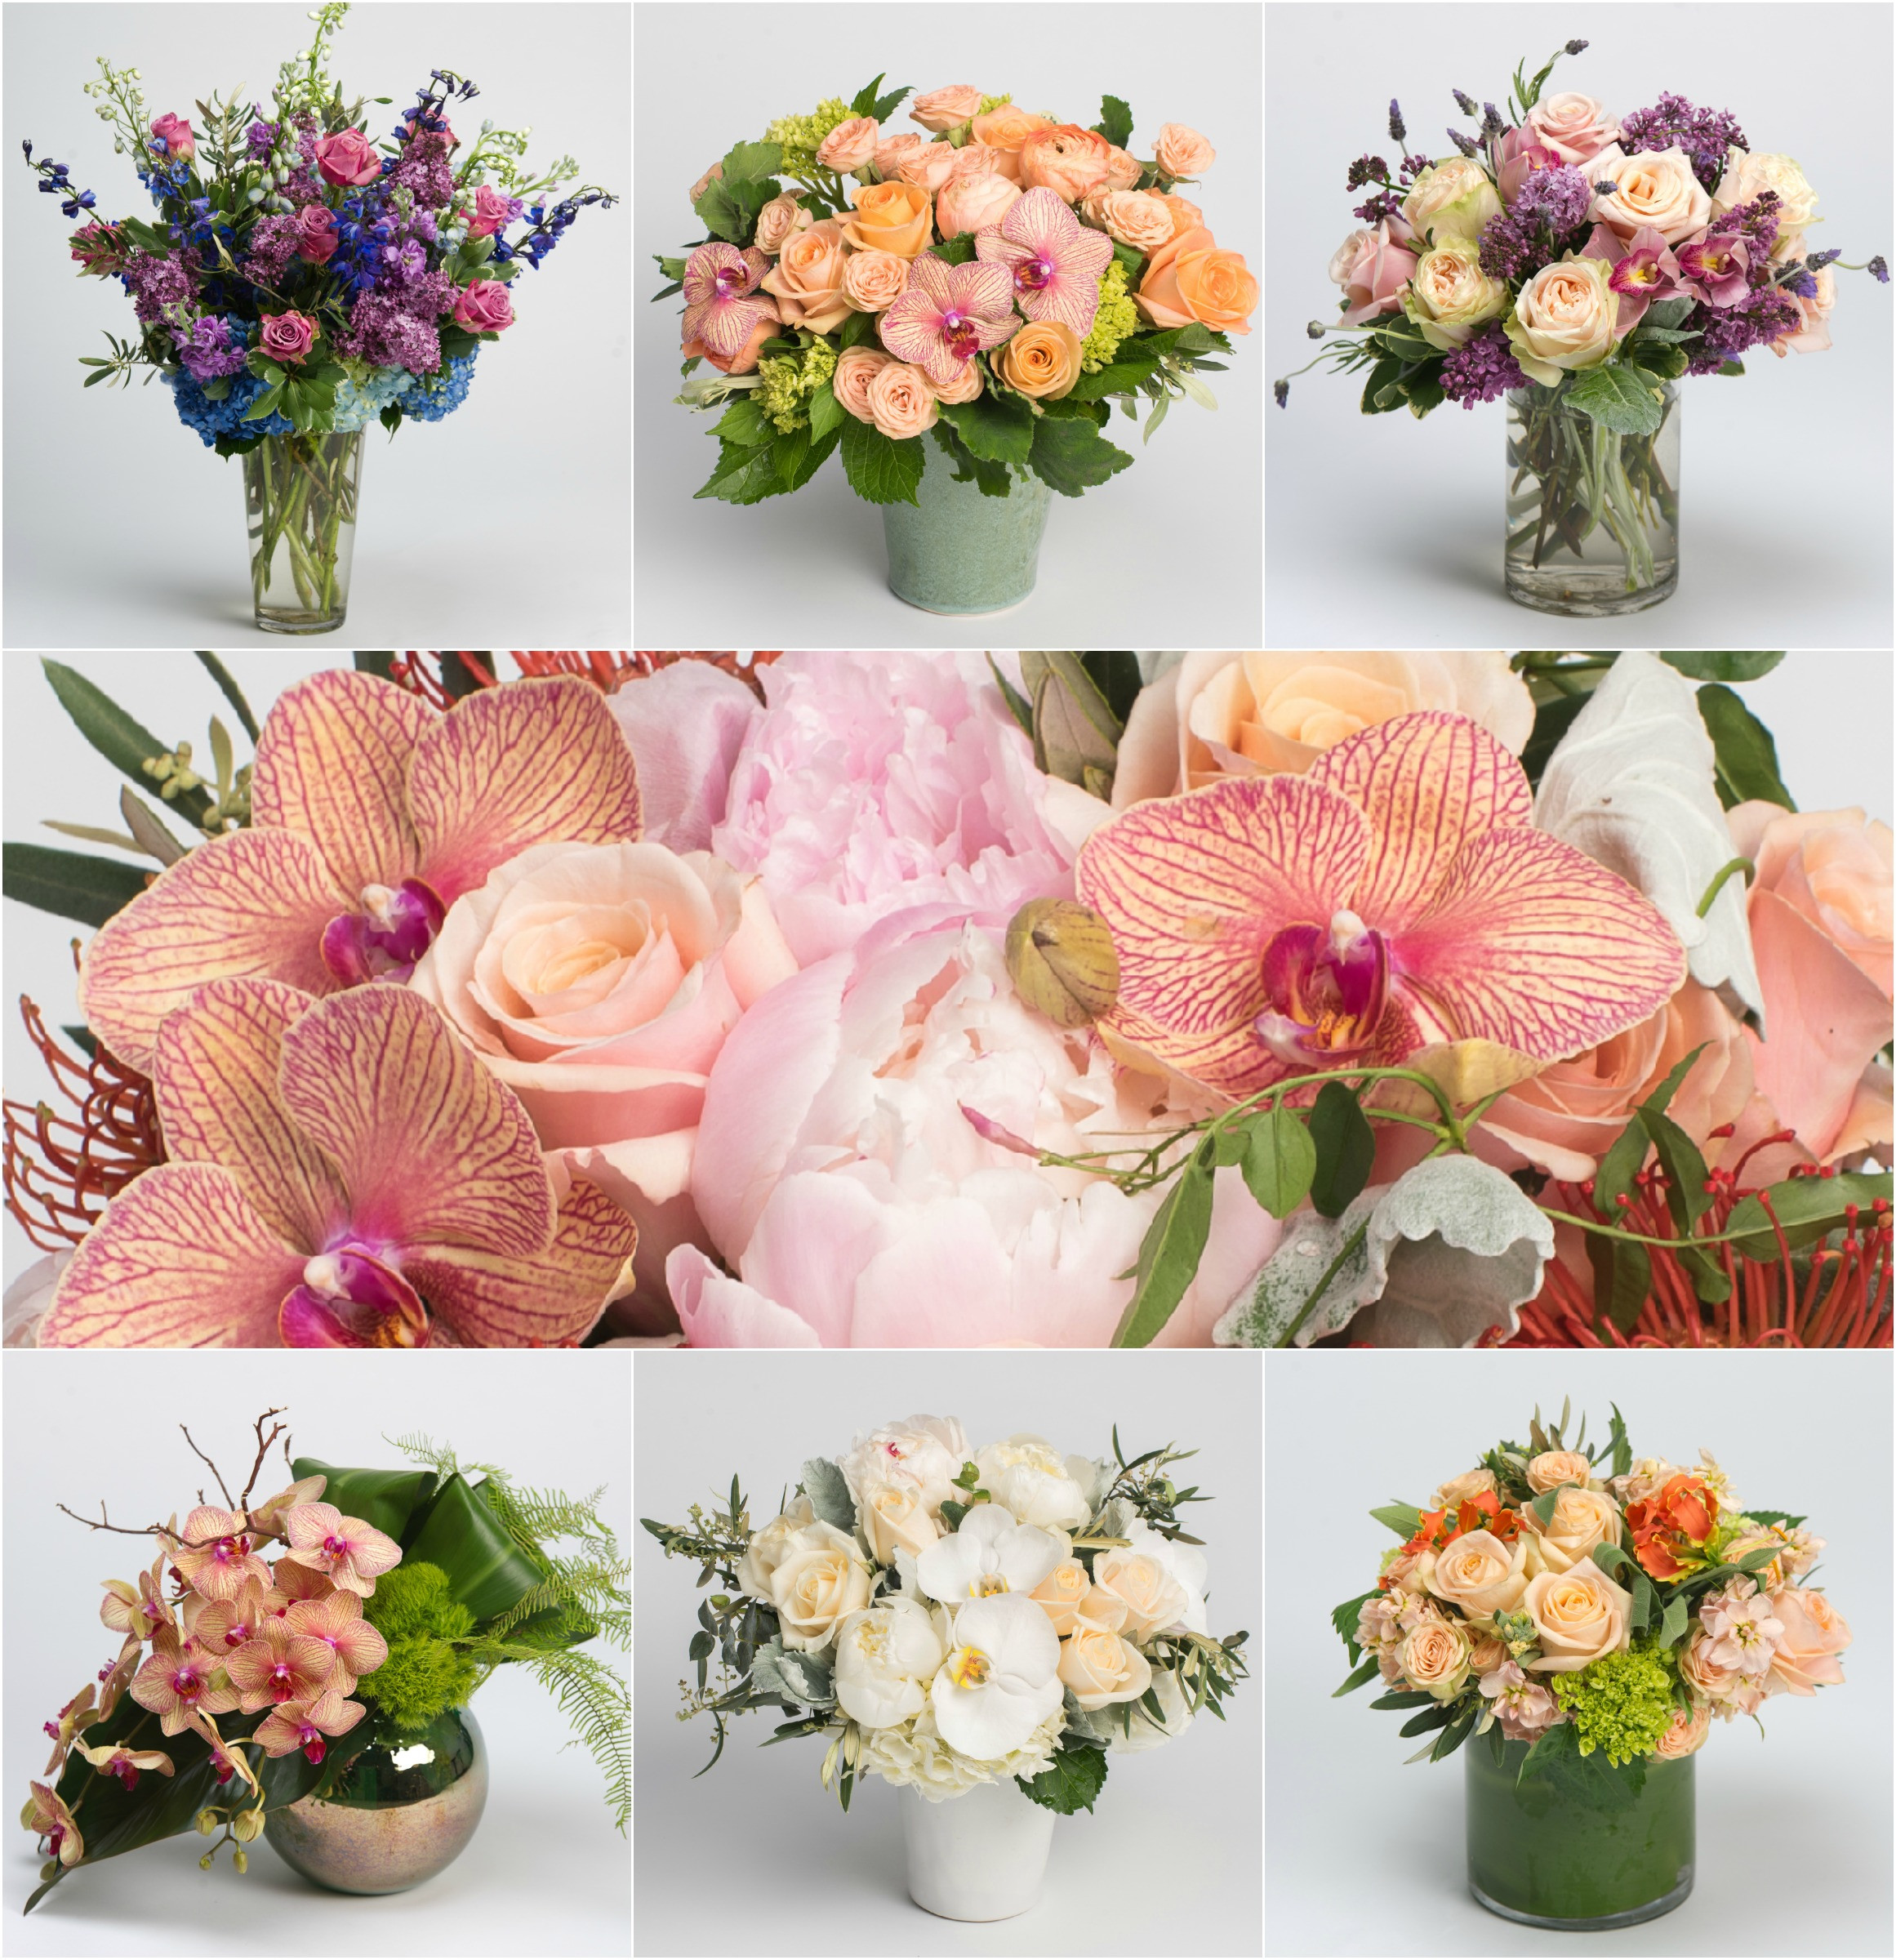 26 Ideal Proflowers Free Vase Code 2024 free download proflowers free vase code of mothers day flower delivery robertsons flowers with regard to free delivery promo valid on mothers day flowers only order must be placed by saturday 5 2 for deli